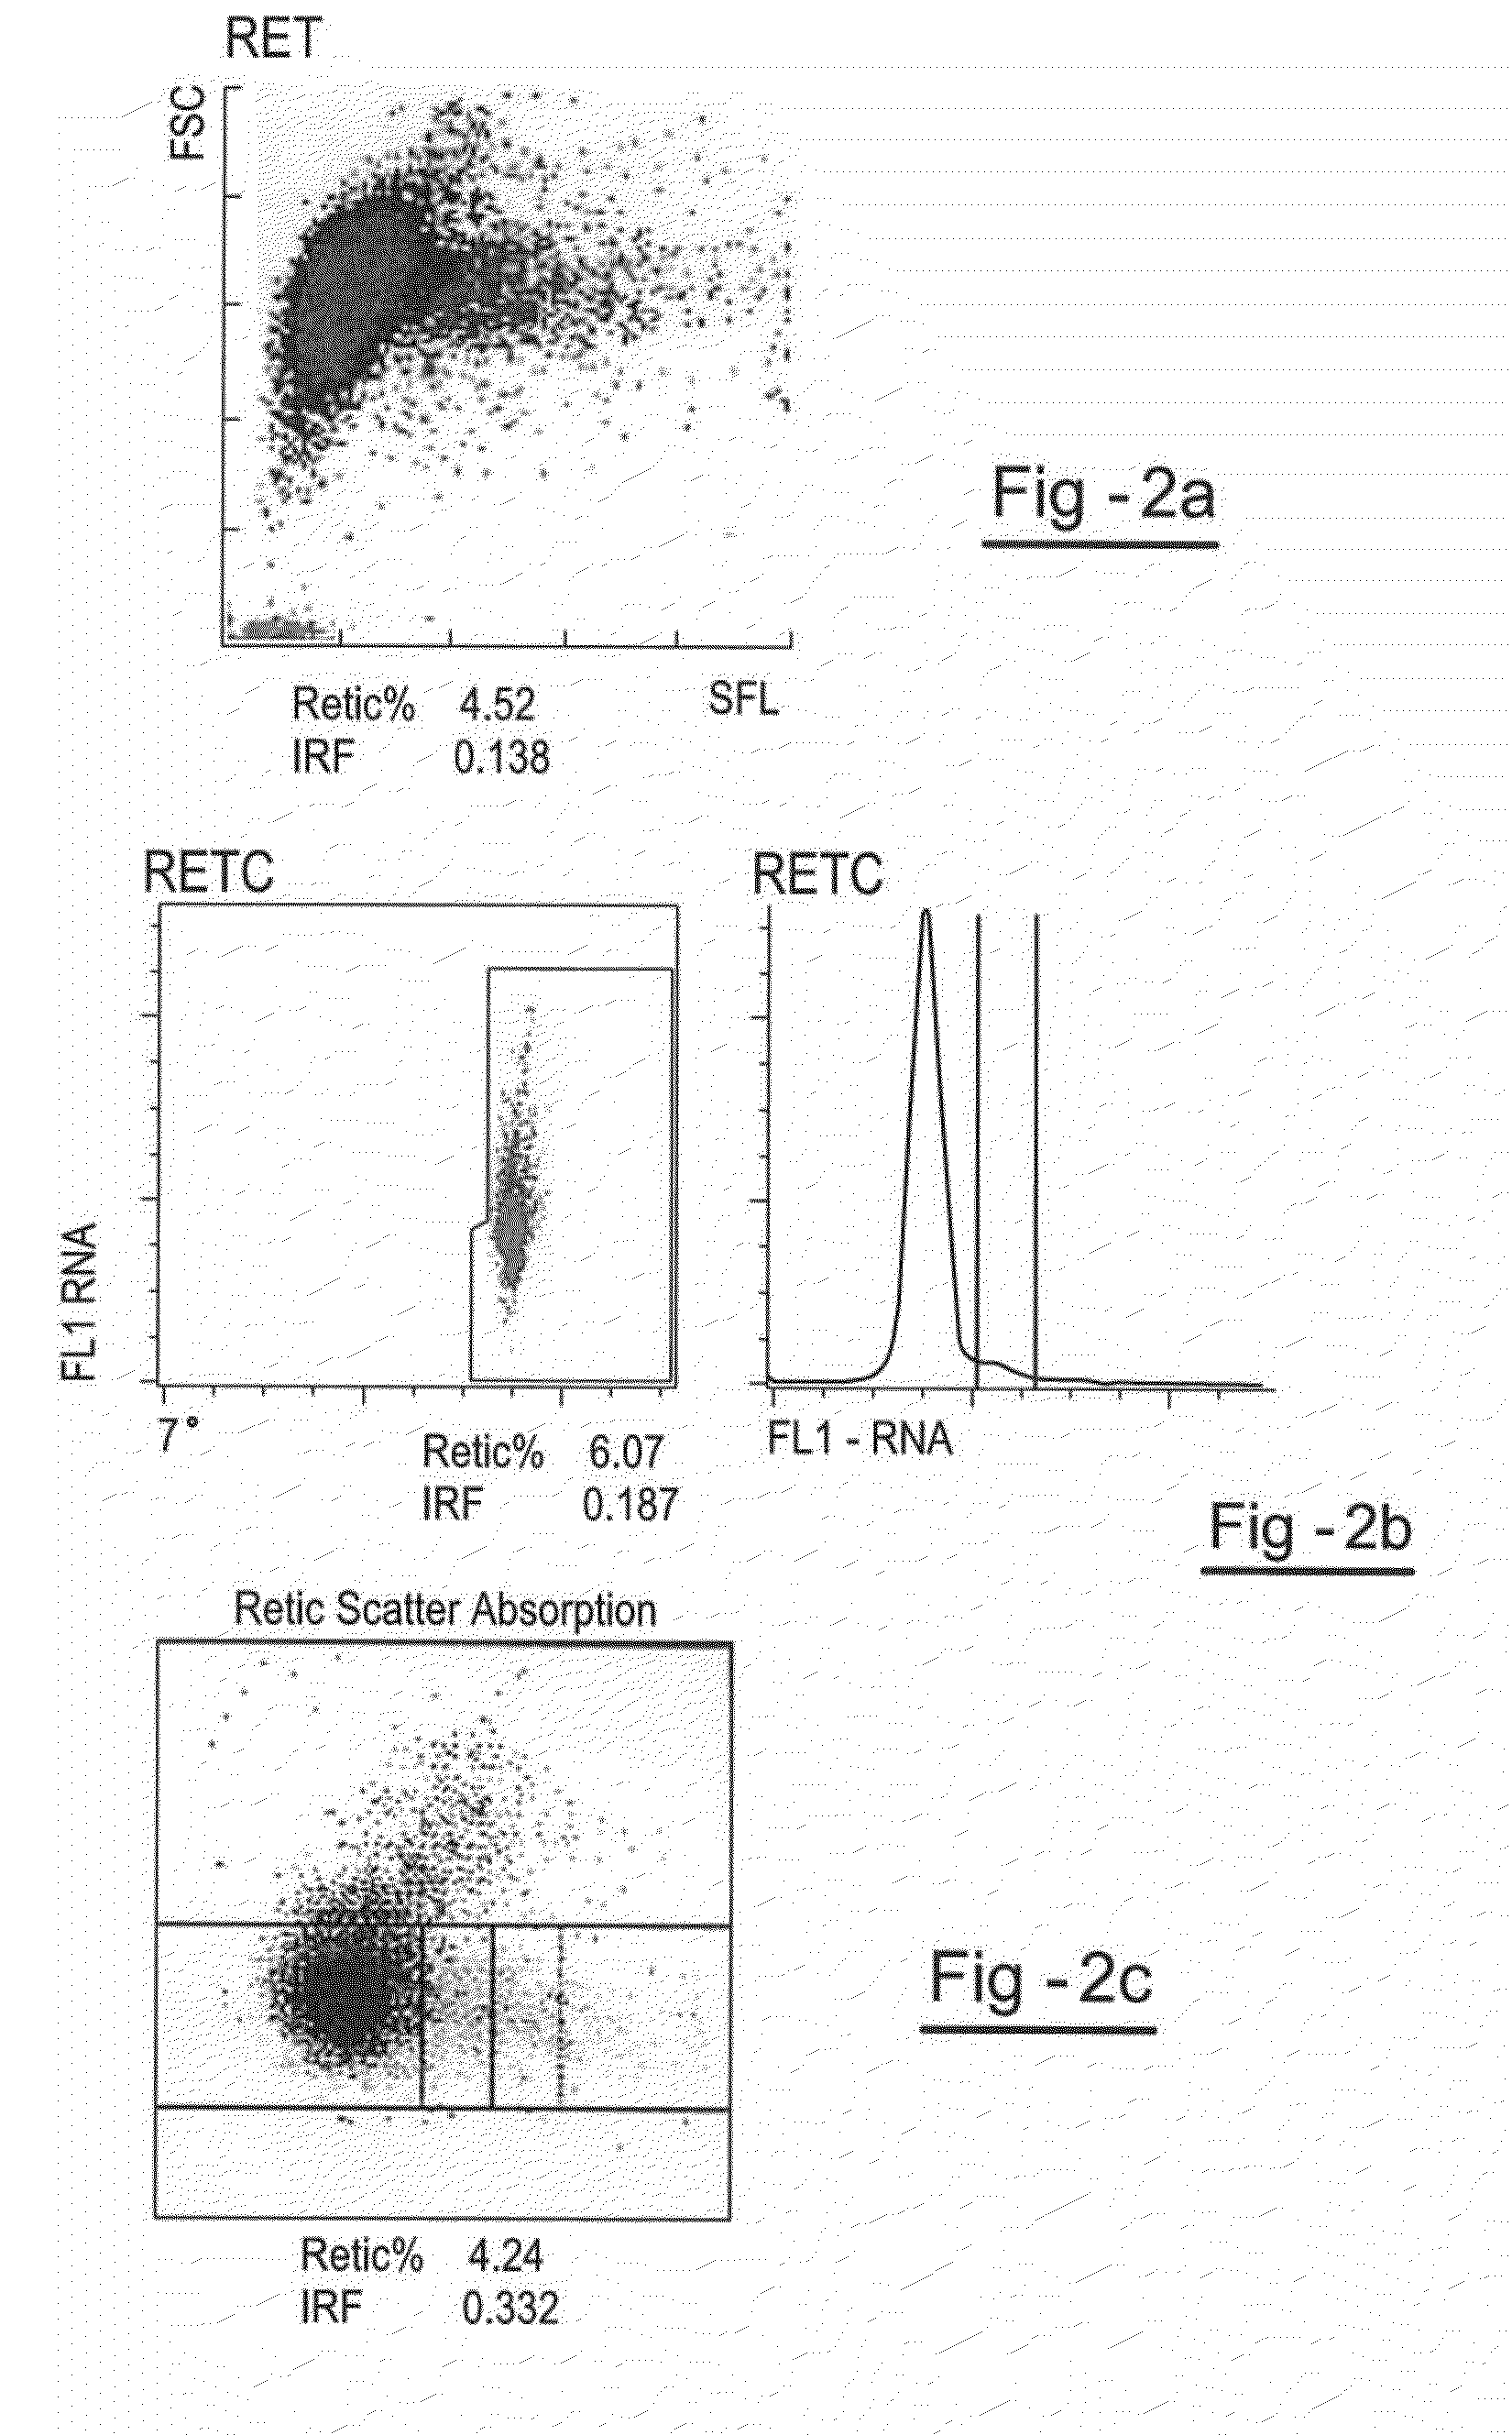 Immature Reticulocyte Fraction Reference Control and Related Methods